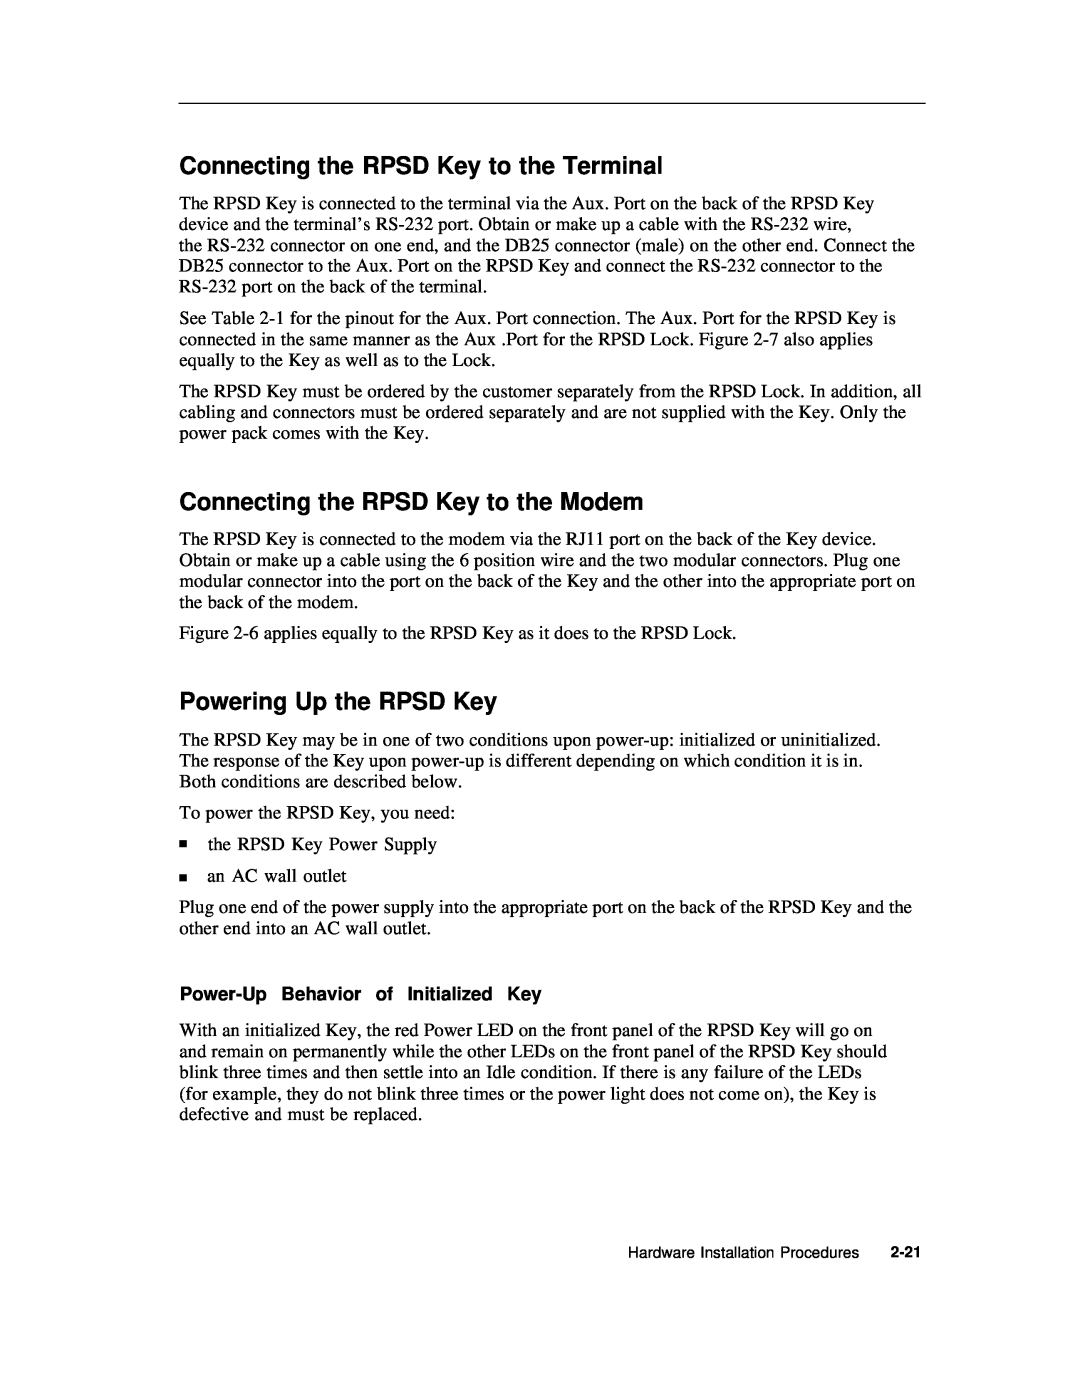 AT&T Remote Port Security Device user manual Connecting the RPSD Key to the Terminal, Connecting the RPSD Key to the Modem 